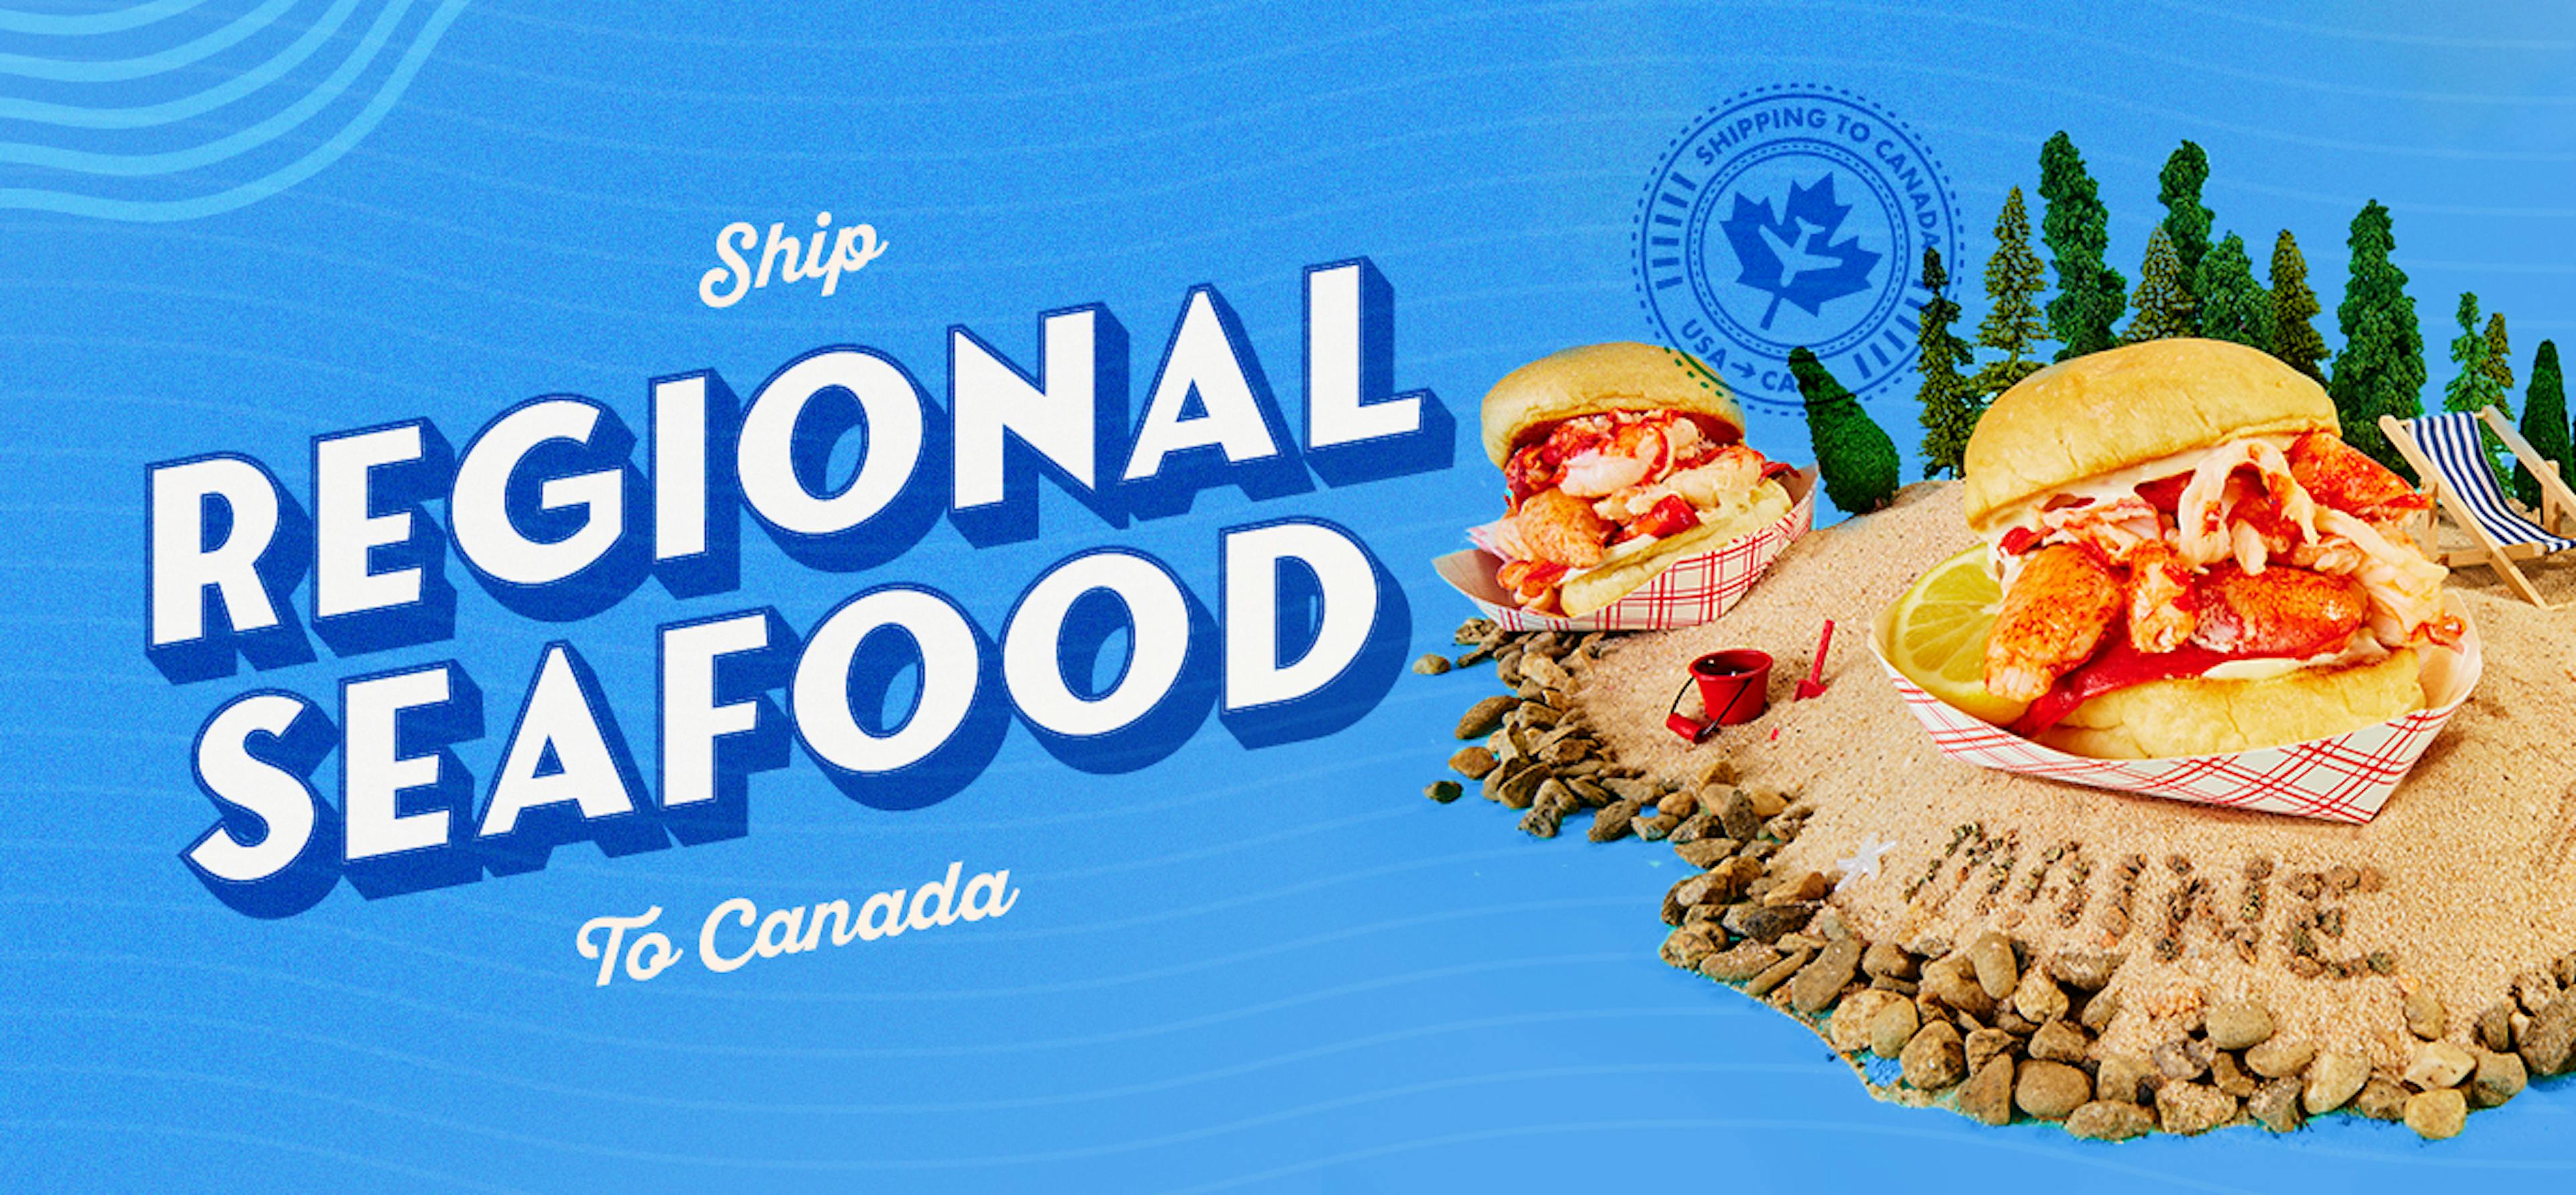 Seafoods that Ship to Canada